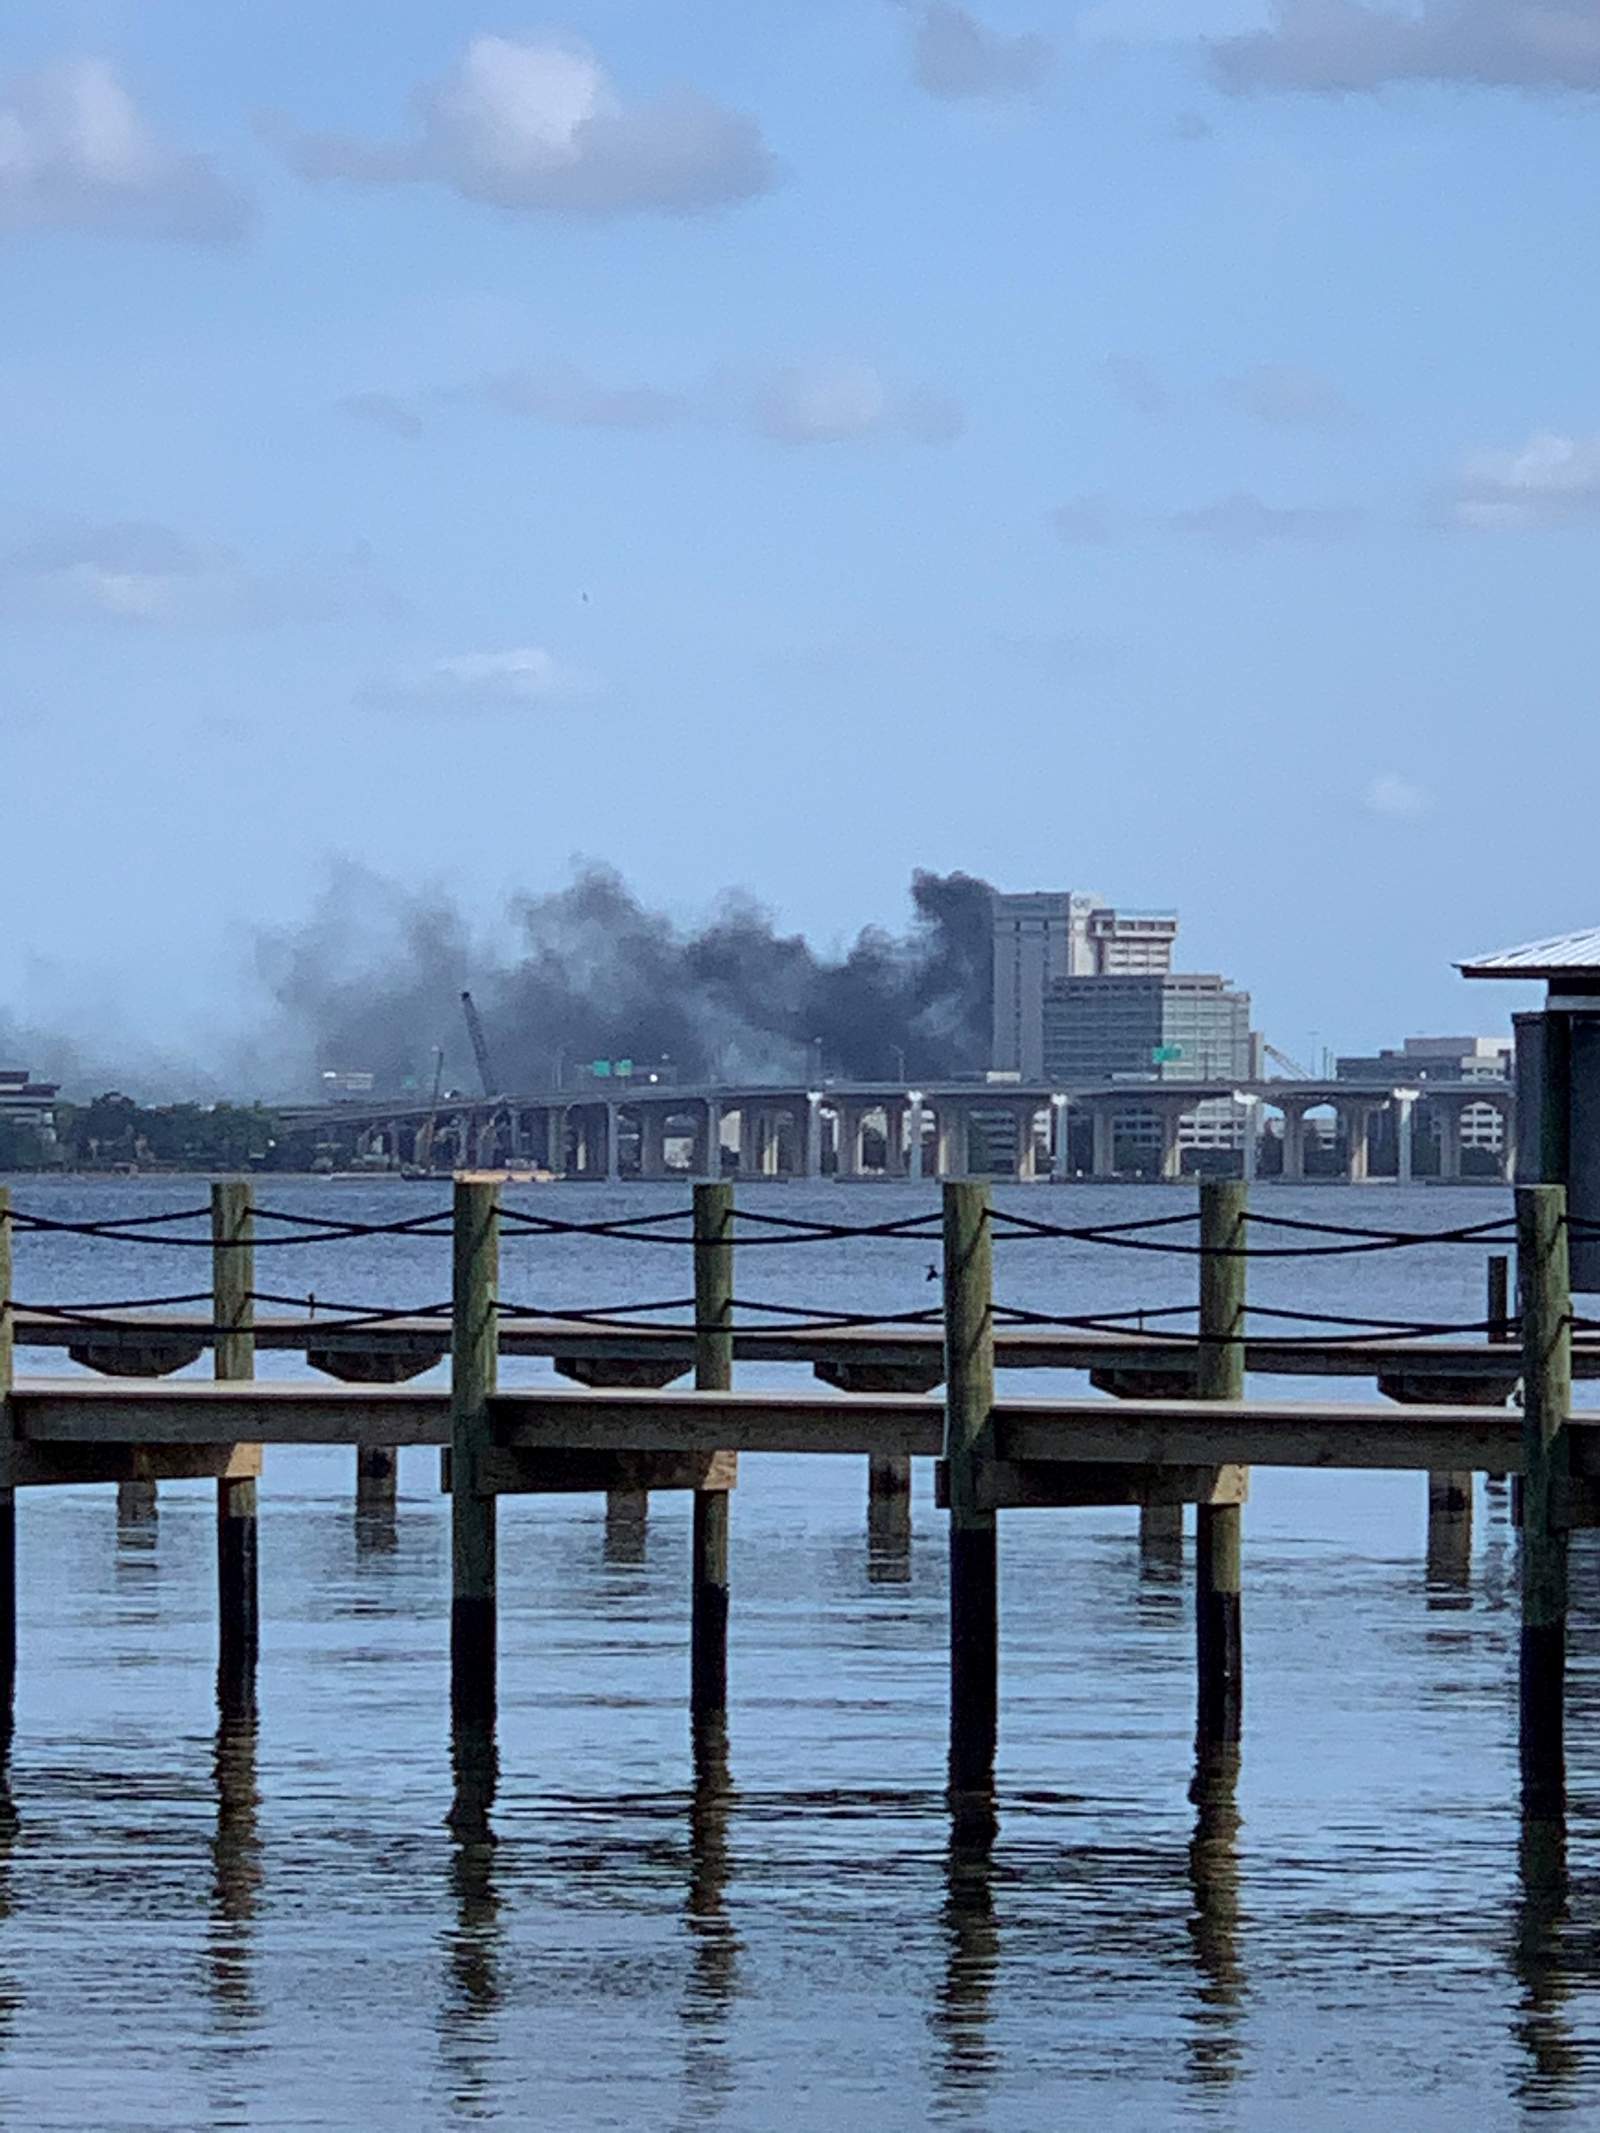 Tire fire extinguished under I-95 overpass, near downtown Jacksonville